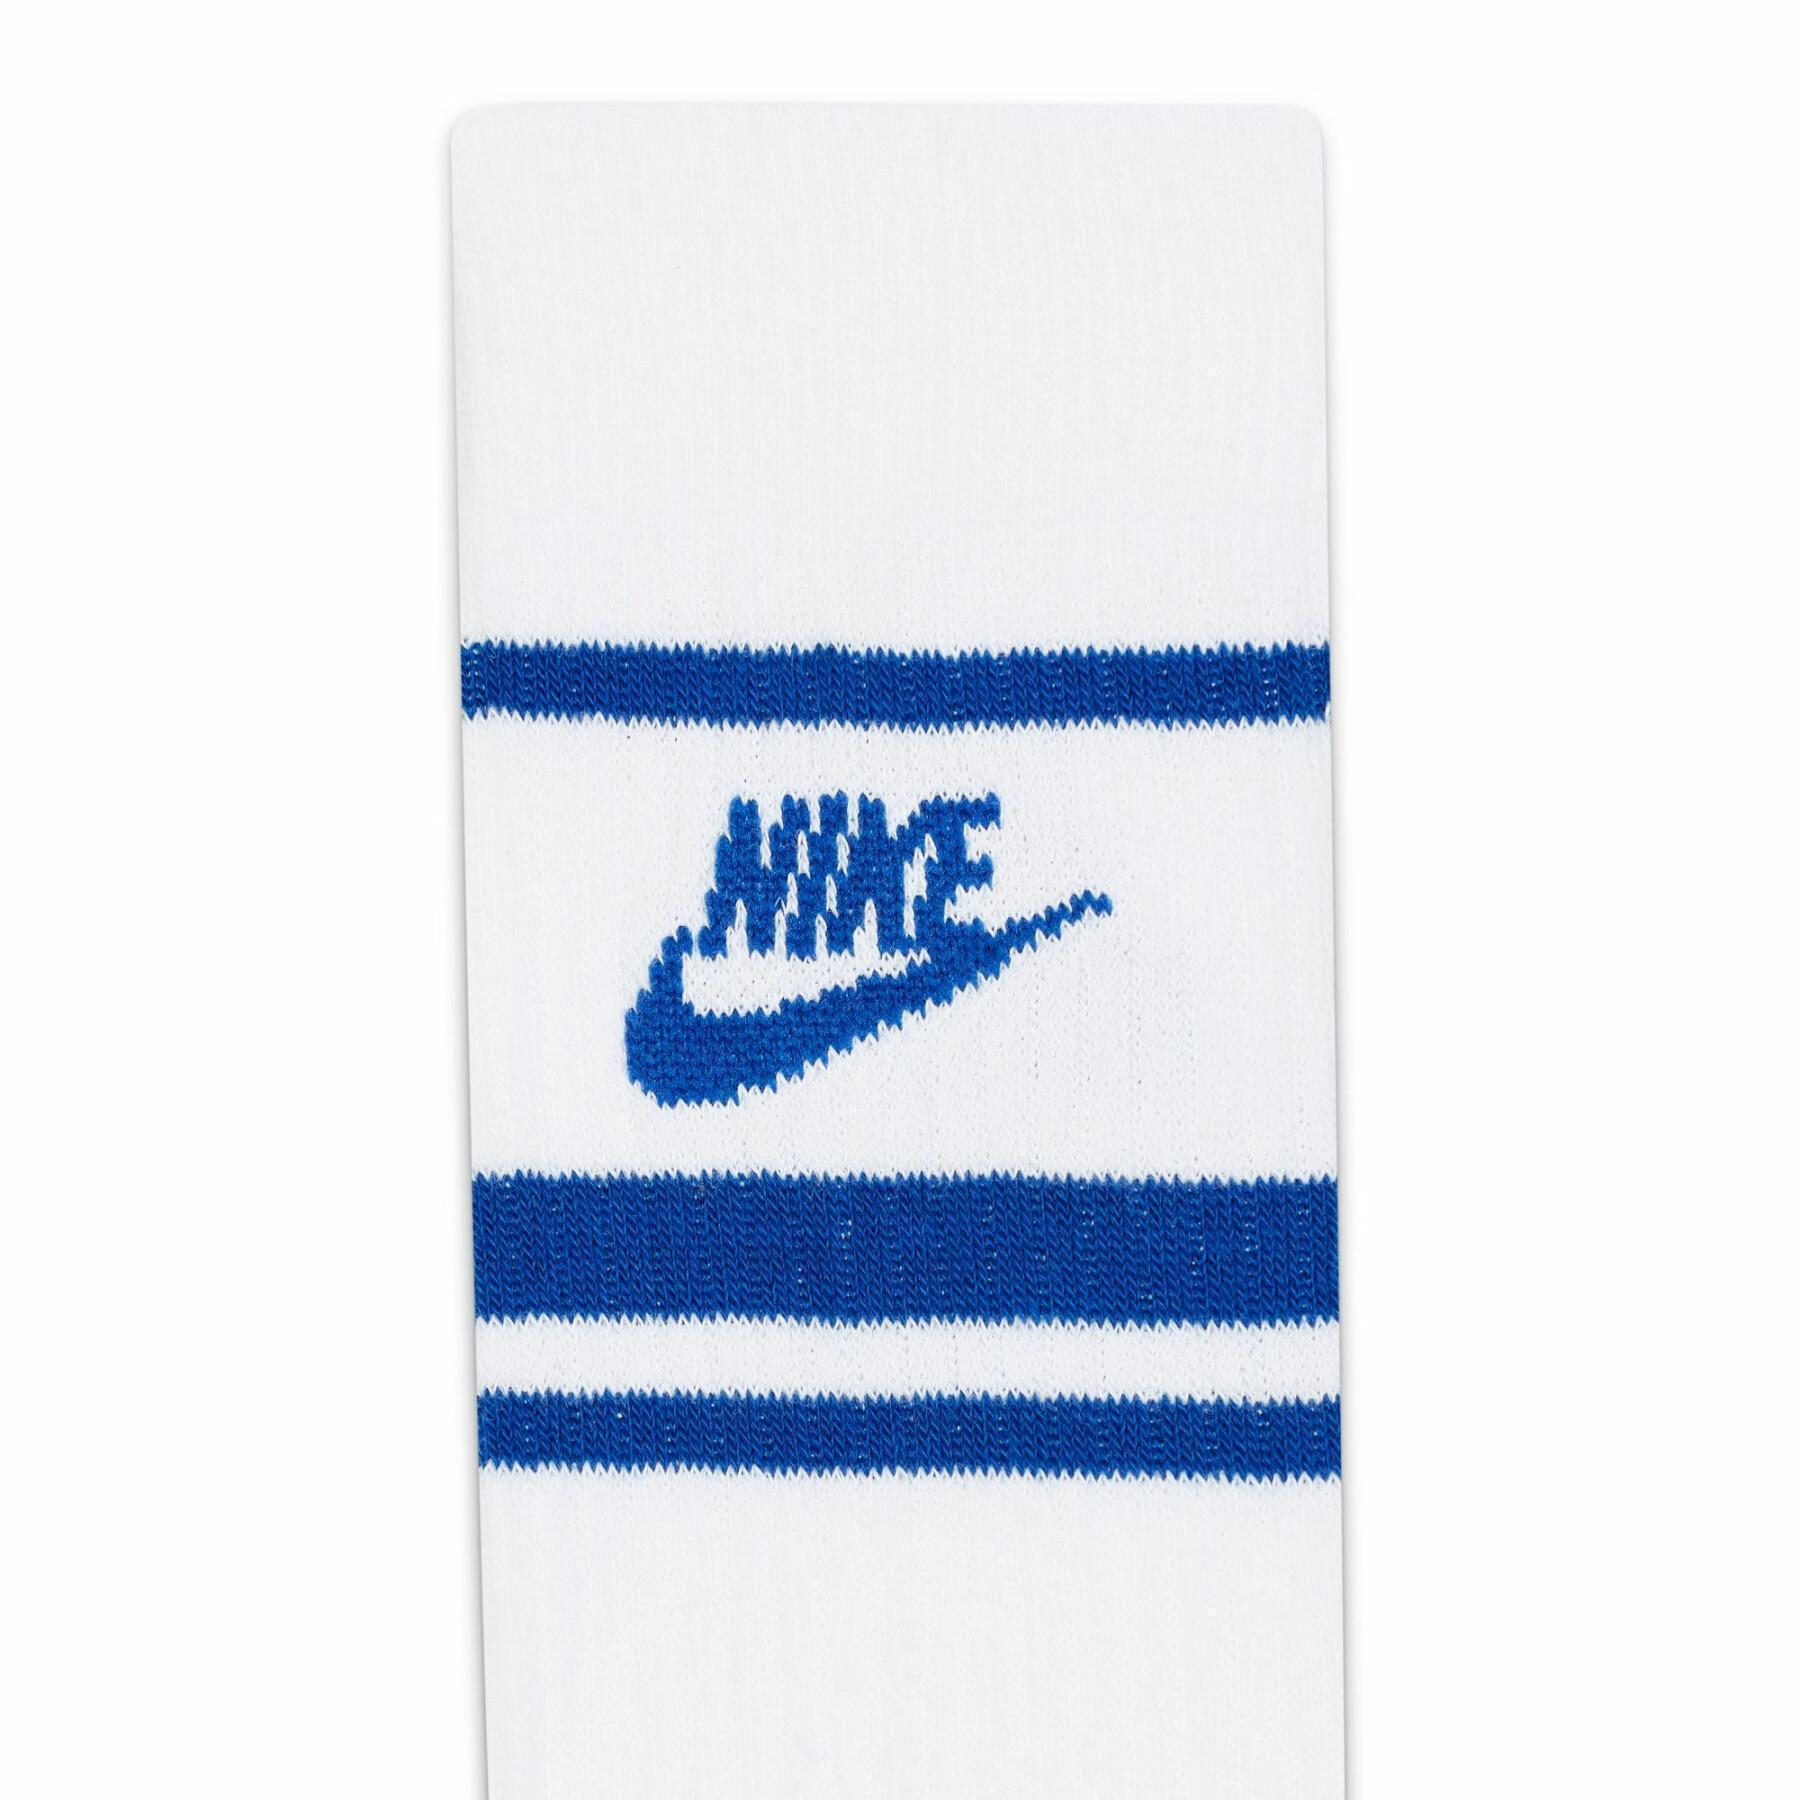 Calcetines Nike nsw everyday essential